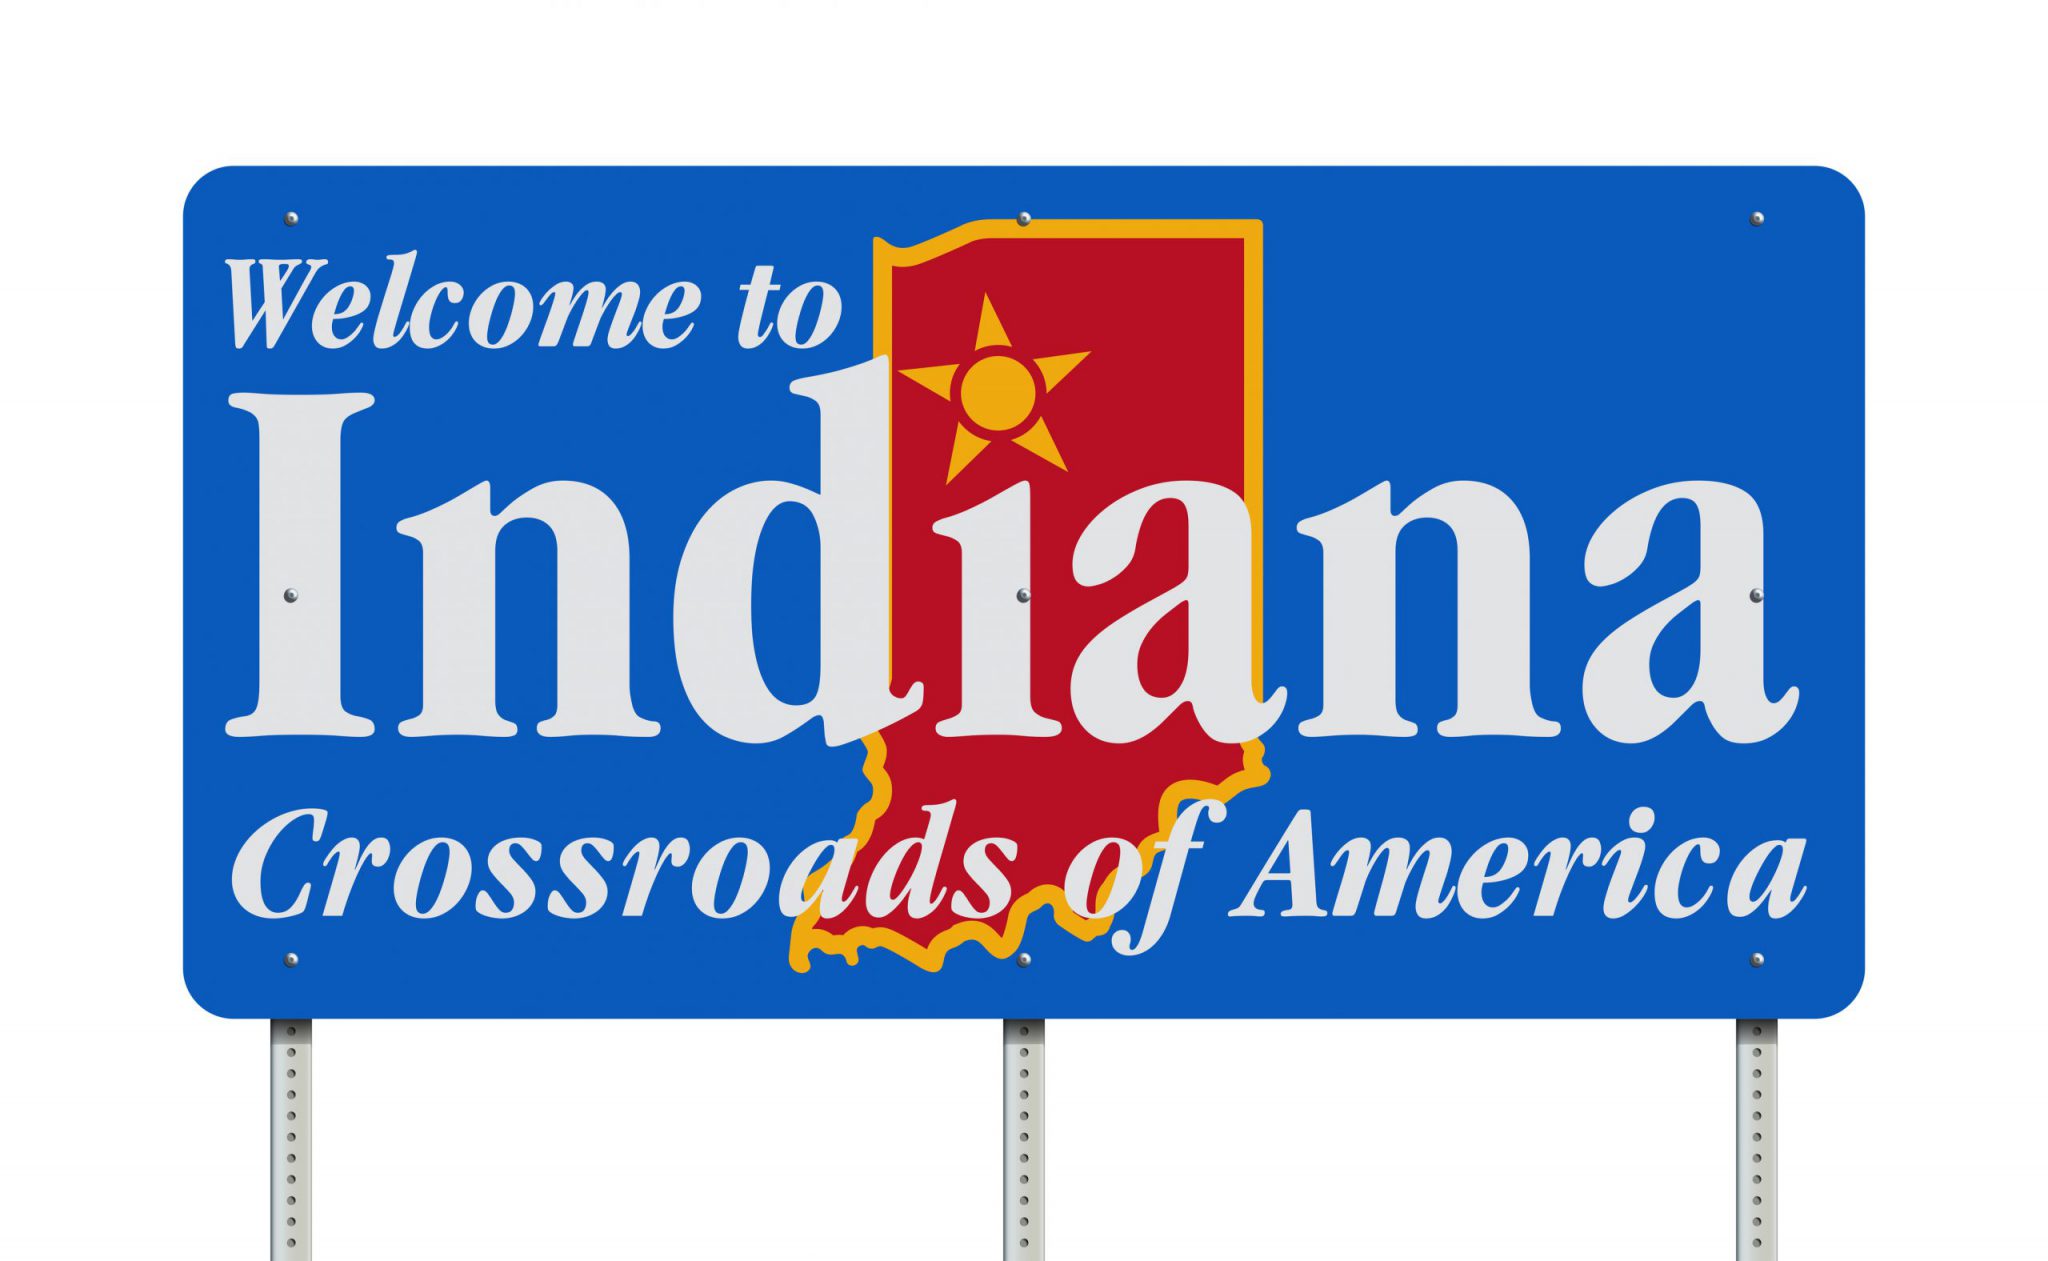 welcome to Indiana road sign